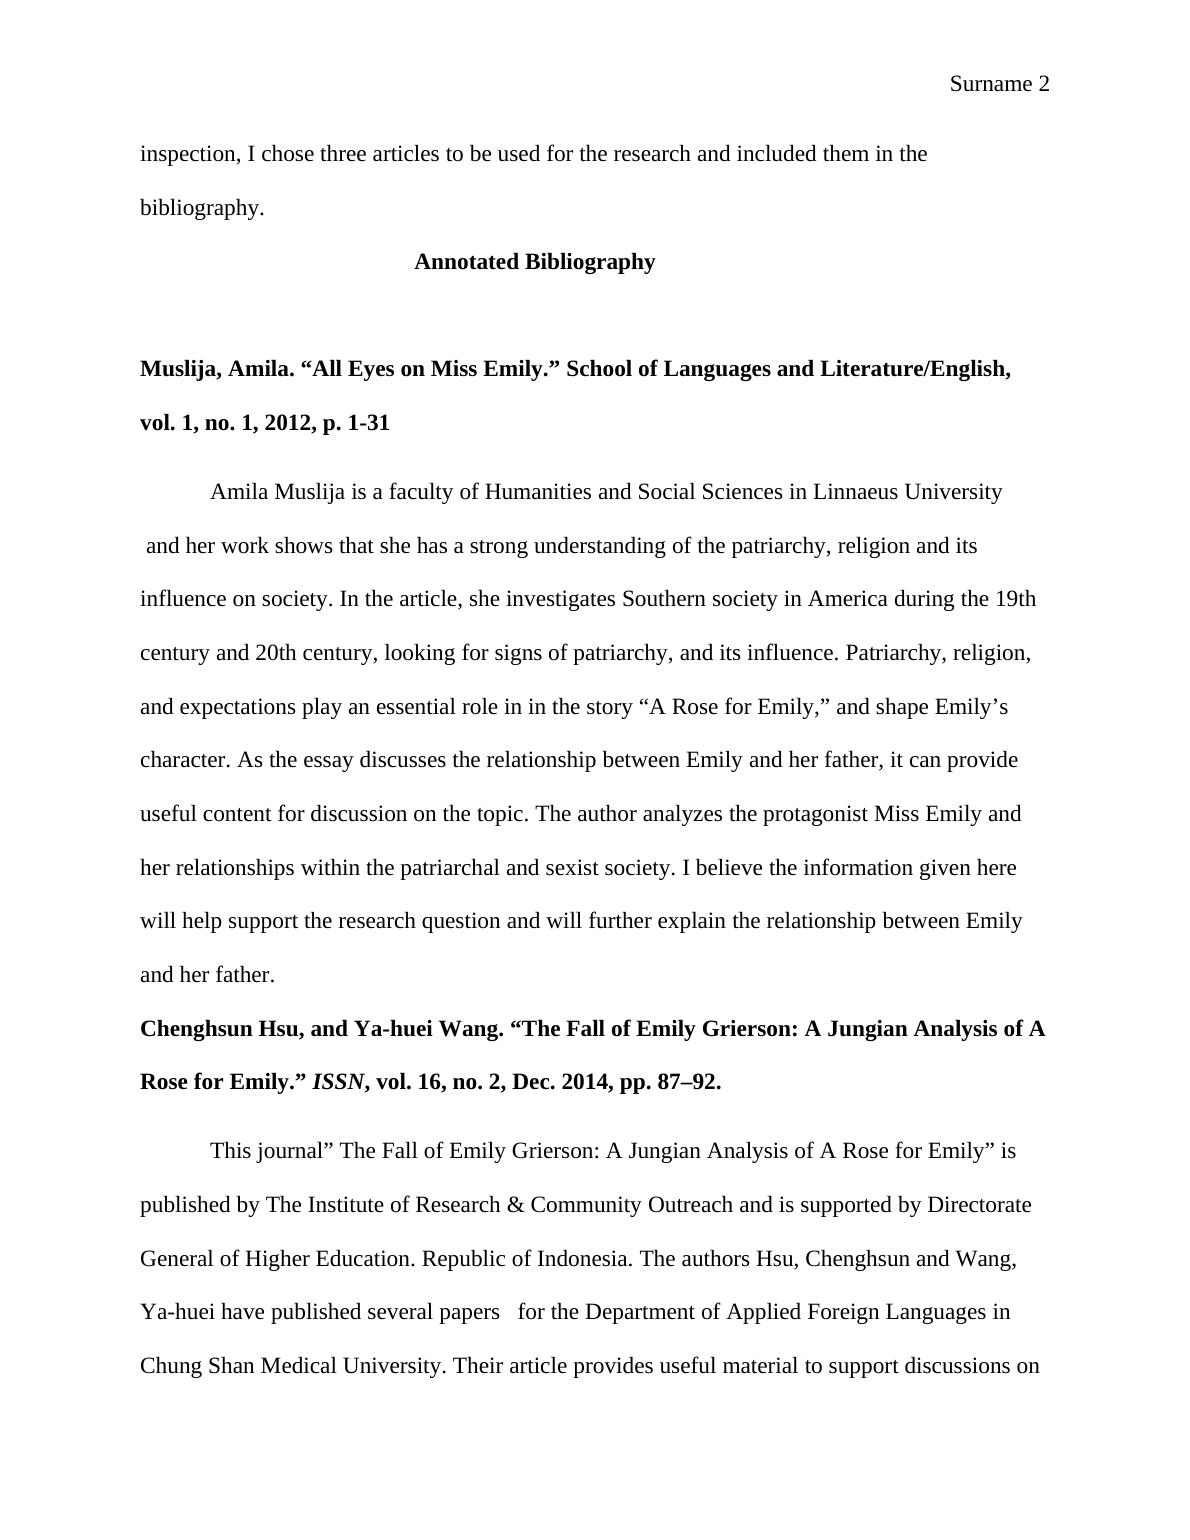 Annotated Bibliography- A Rose for Emily_2